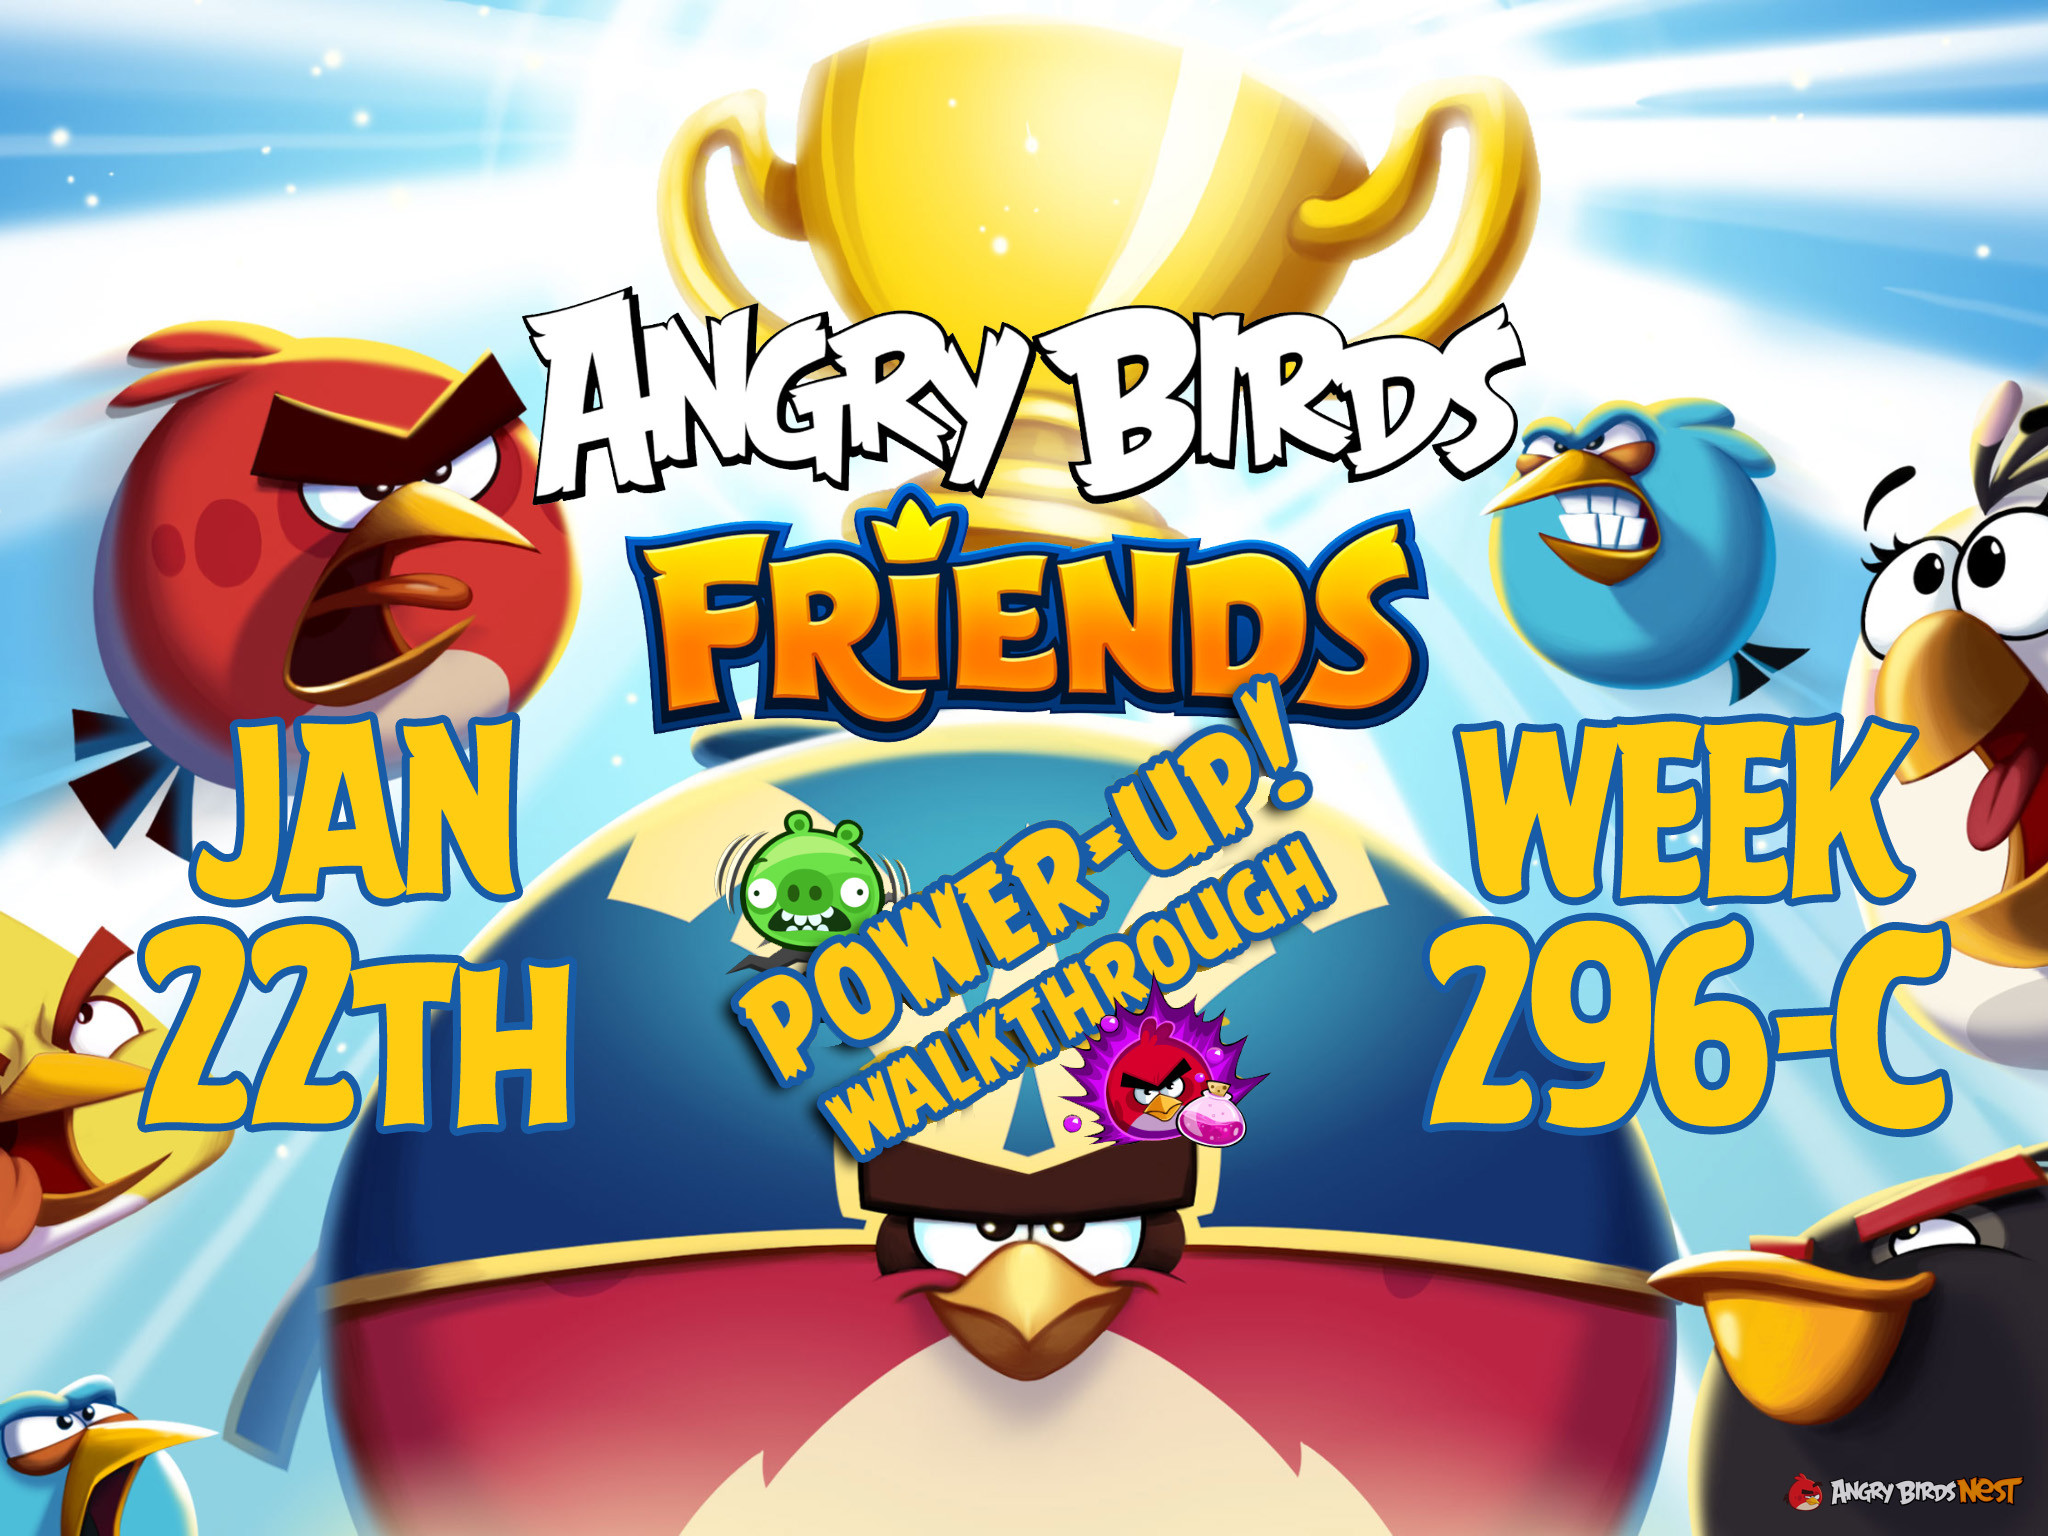 Angry Birds Friends Tournament Week 296-C Feature Image PU